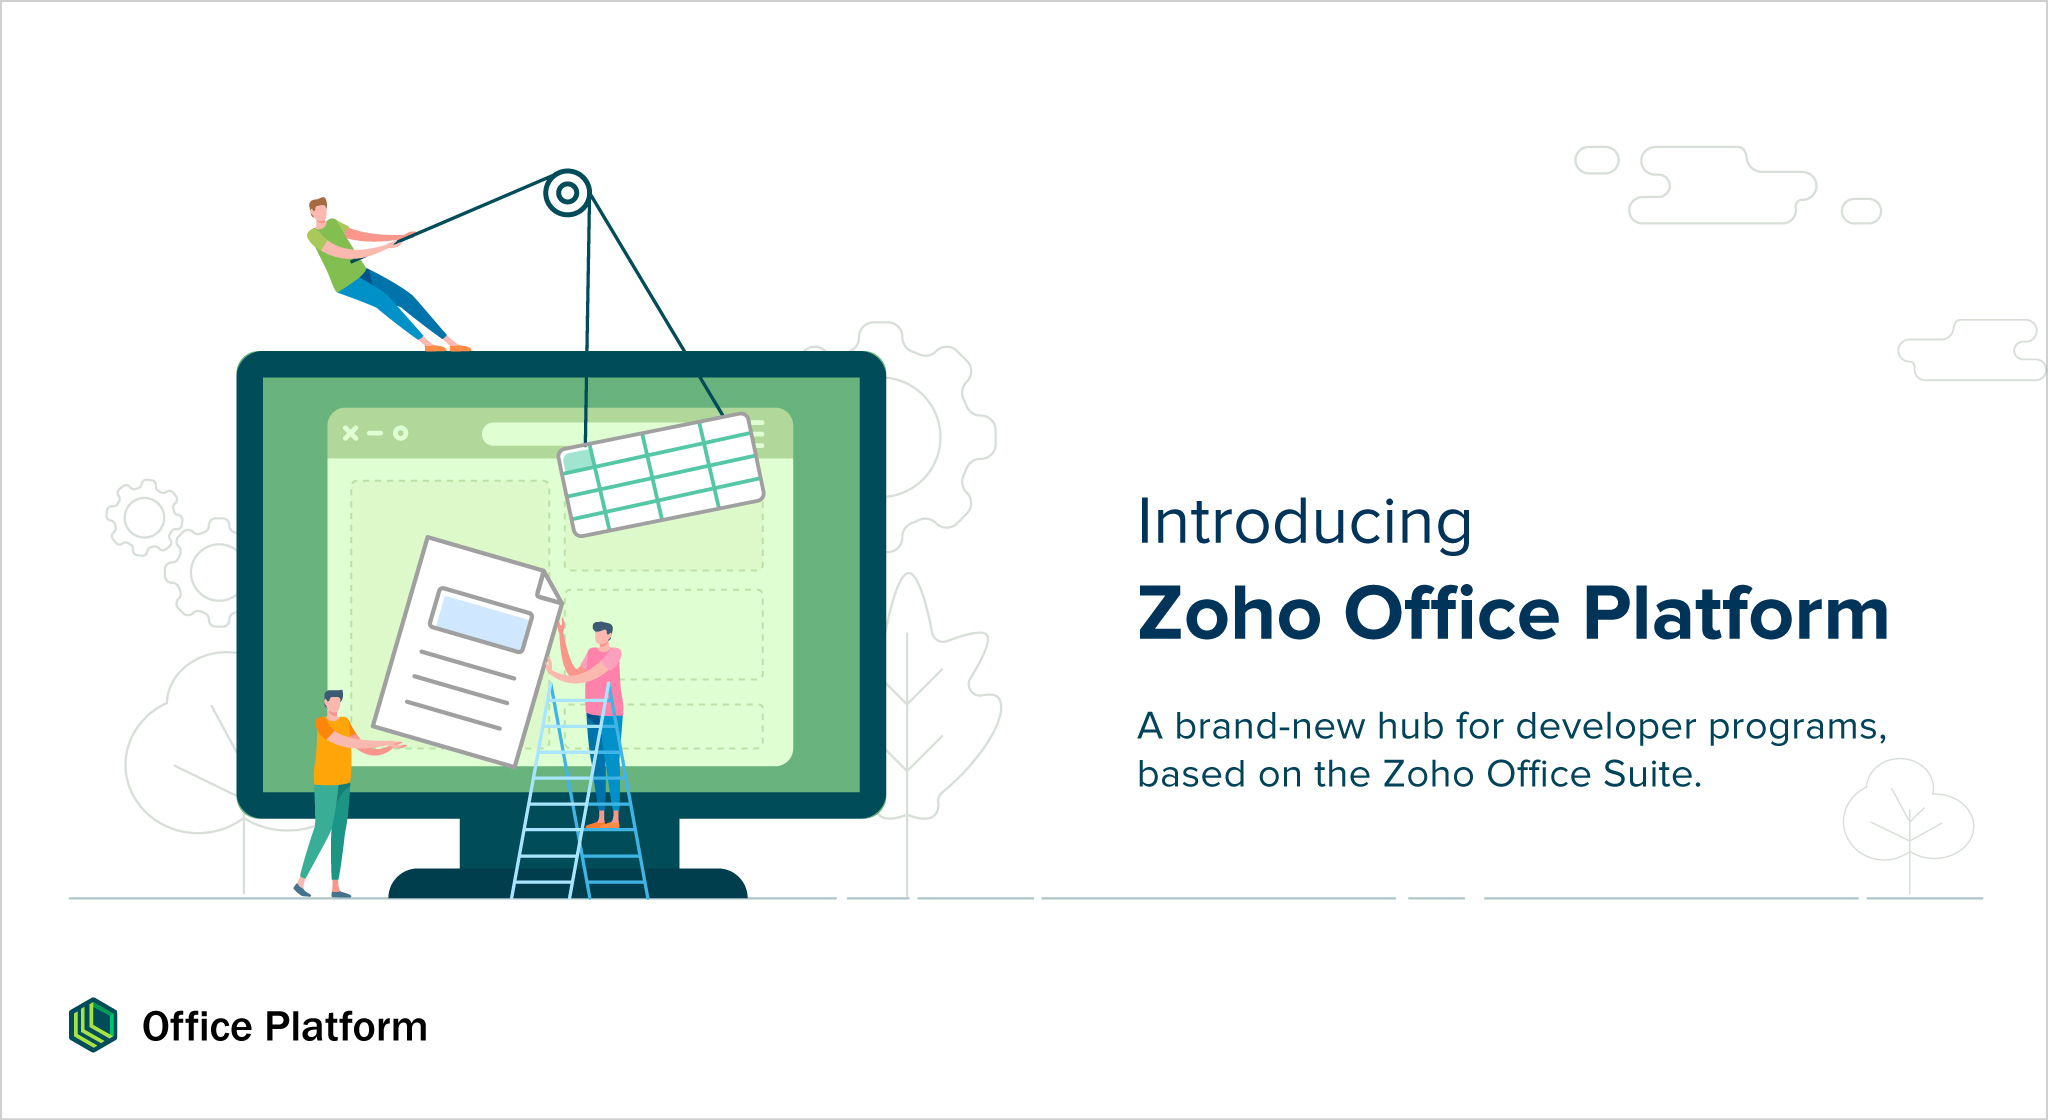 Build integrated solutions with the Zoho Office Suite—introducing Zoho Office Platform